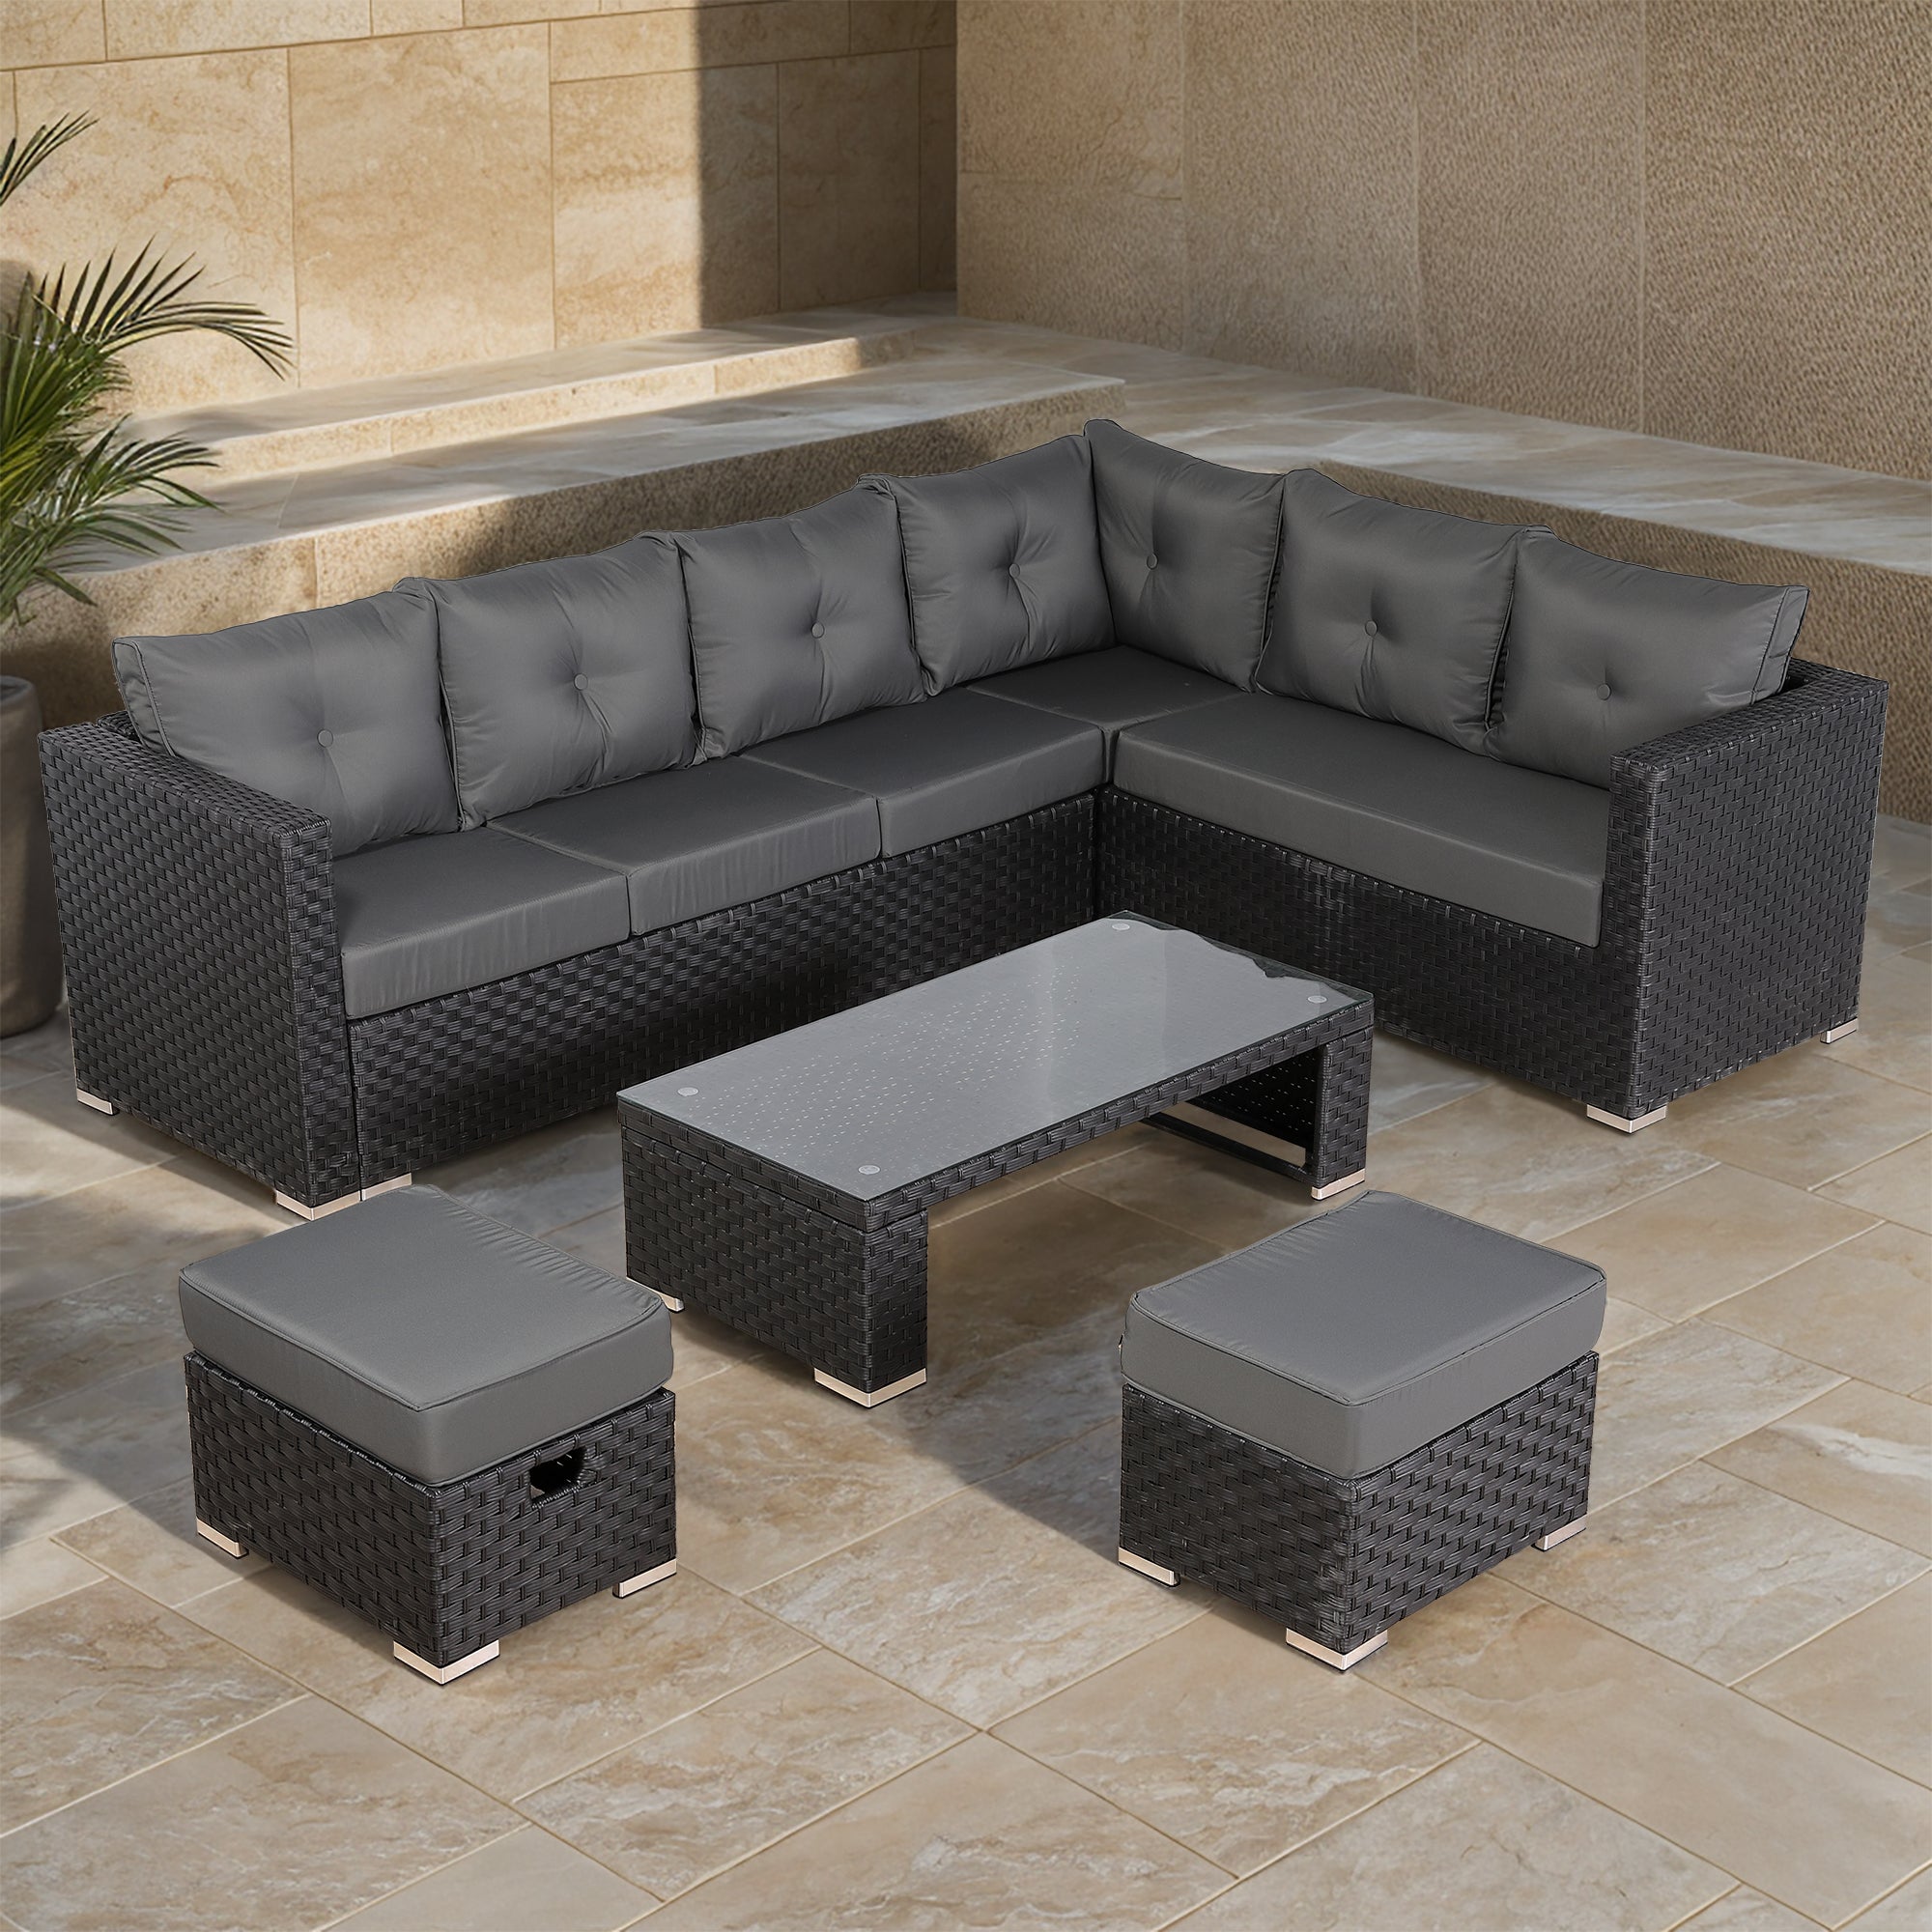 Newick Modular Corner Sofa With Coffee Table And 2 Footstools In Black Weave(CS06)